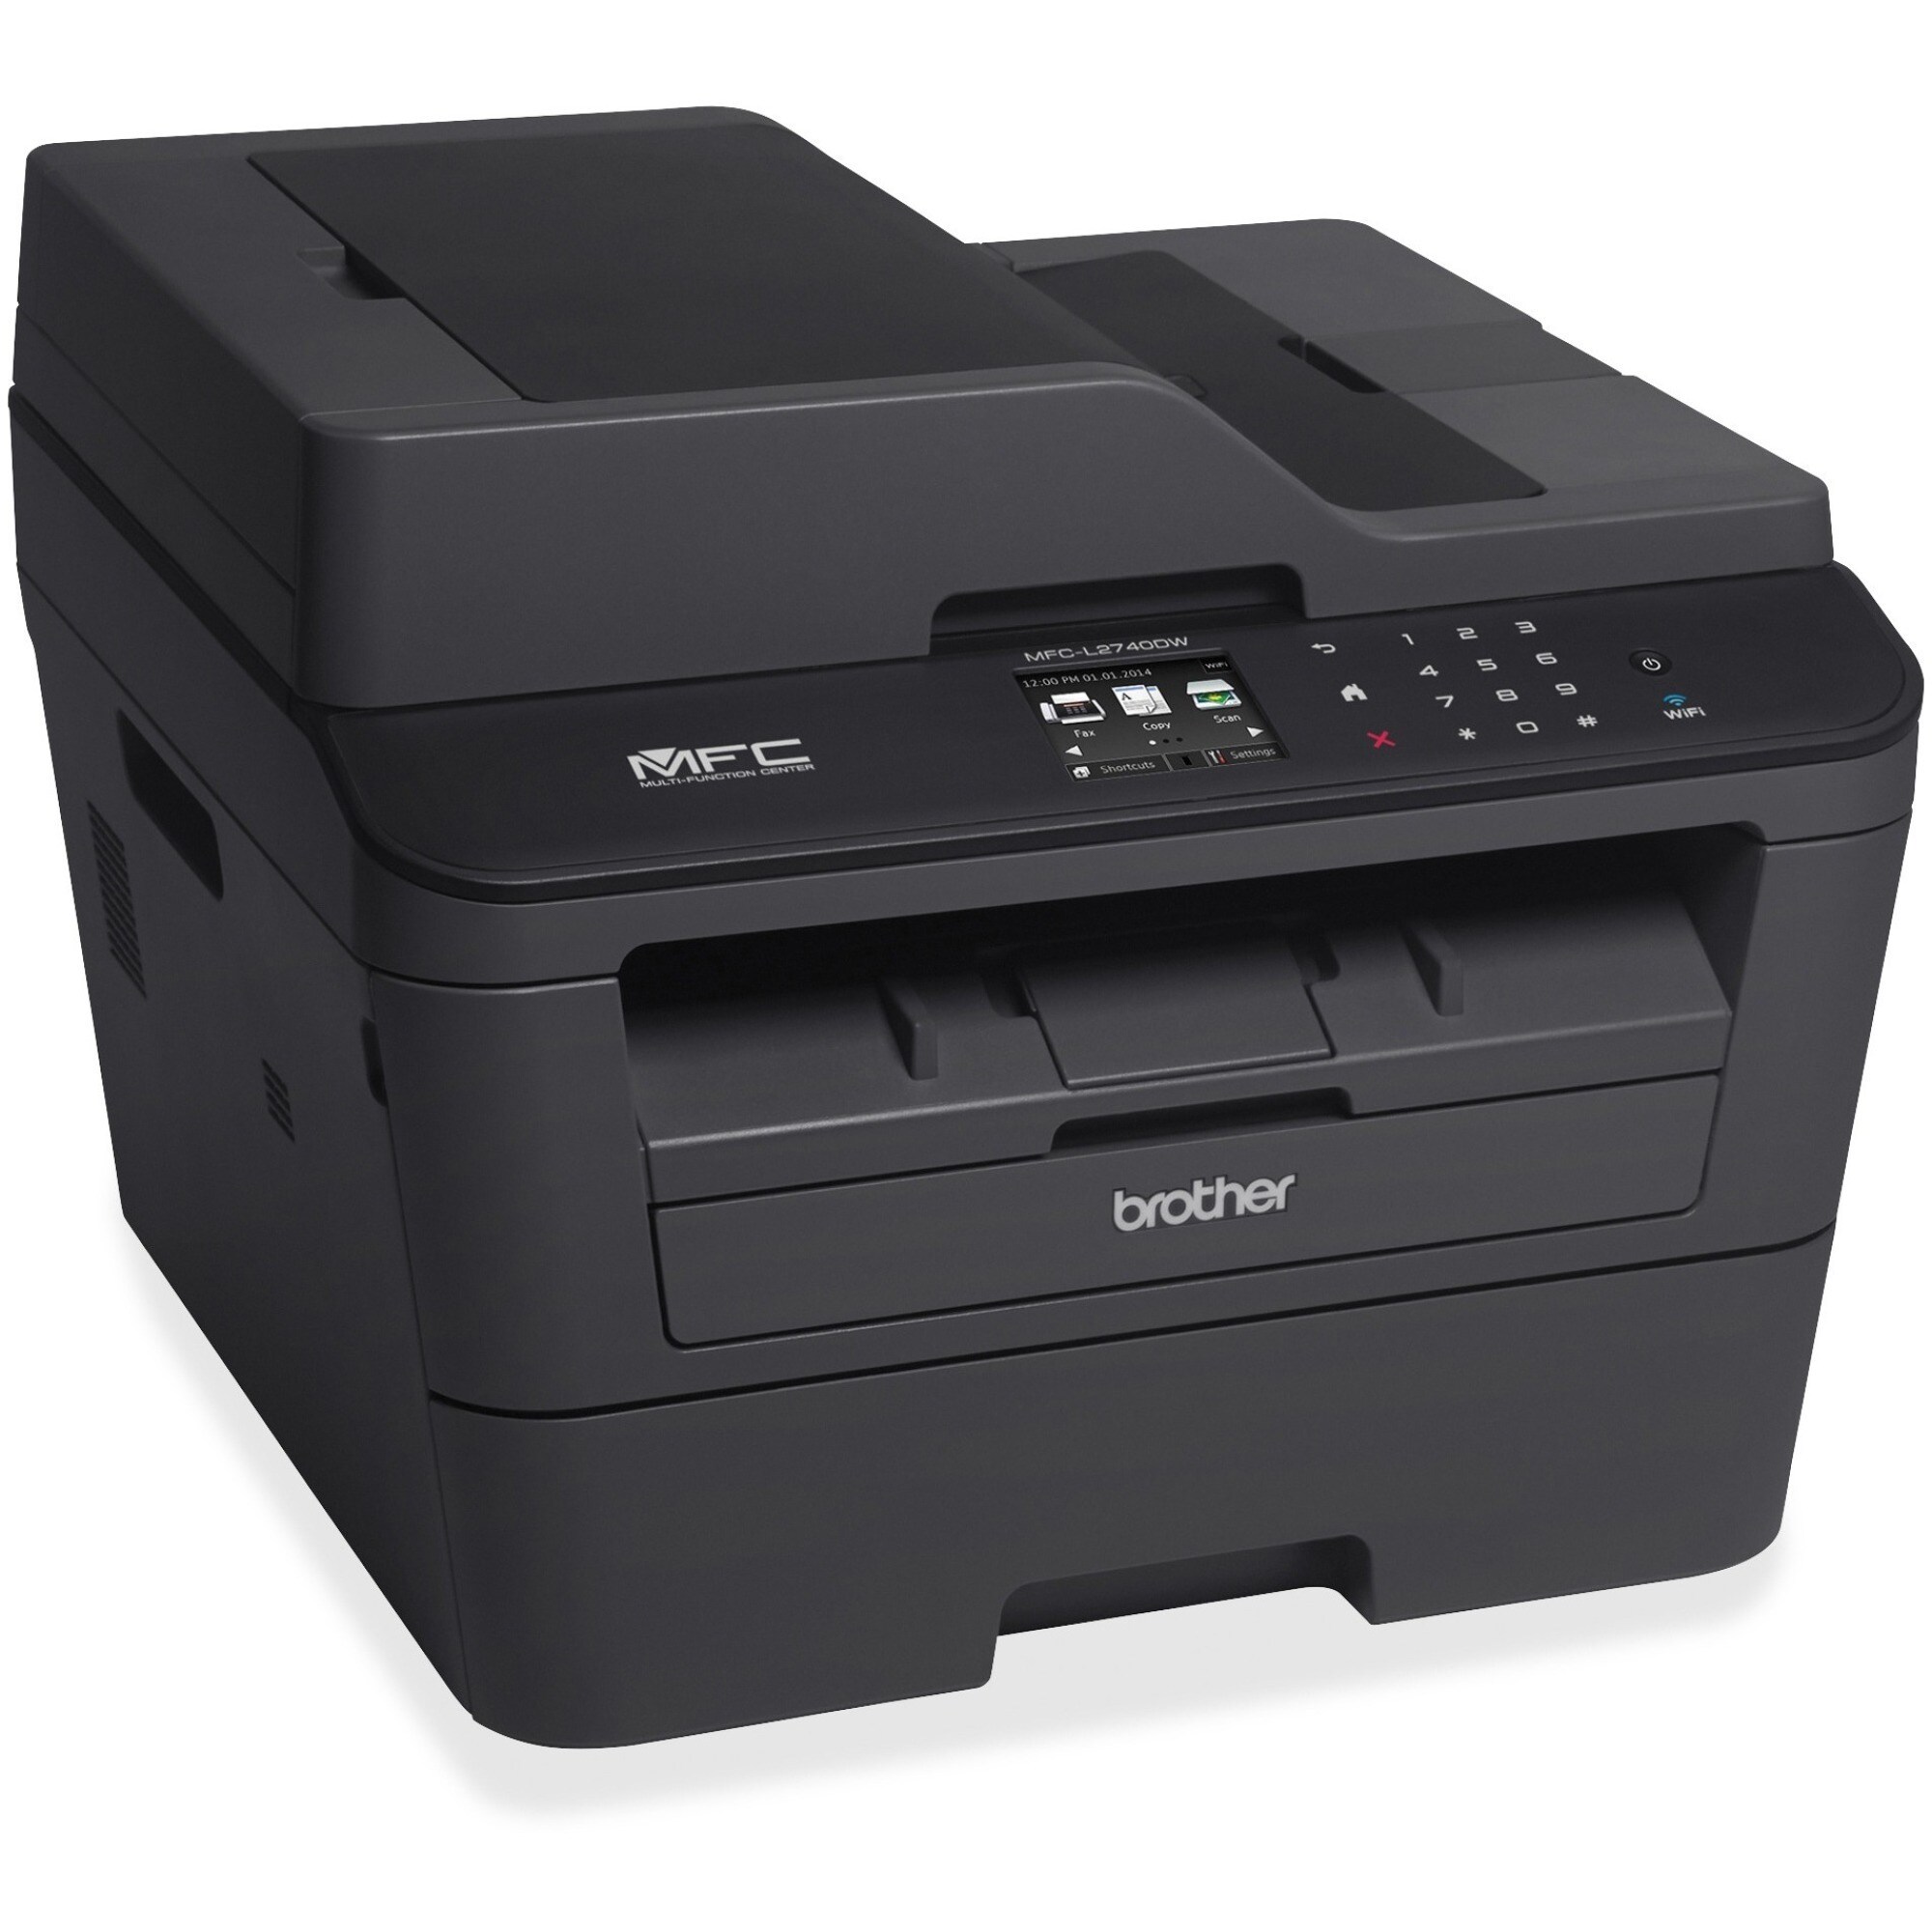 Brother Color Laser Printer Multifunction Printer All In One Printer